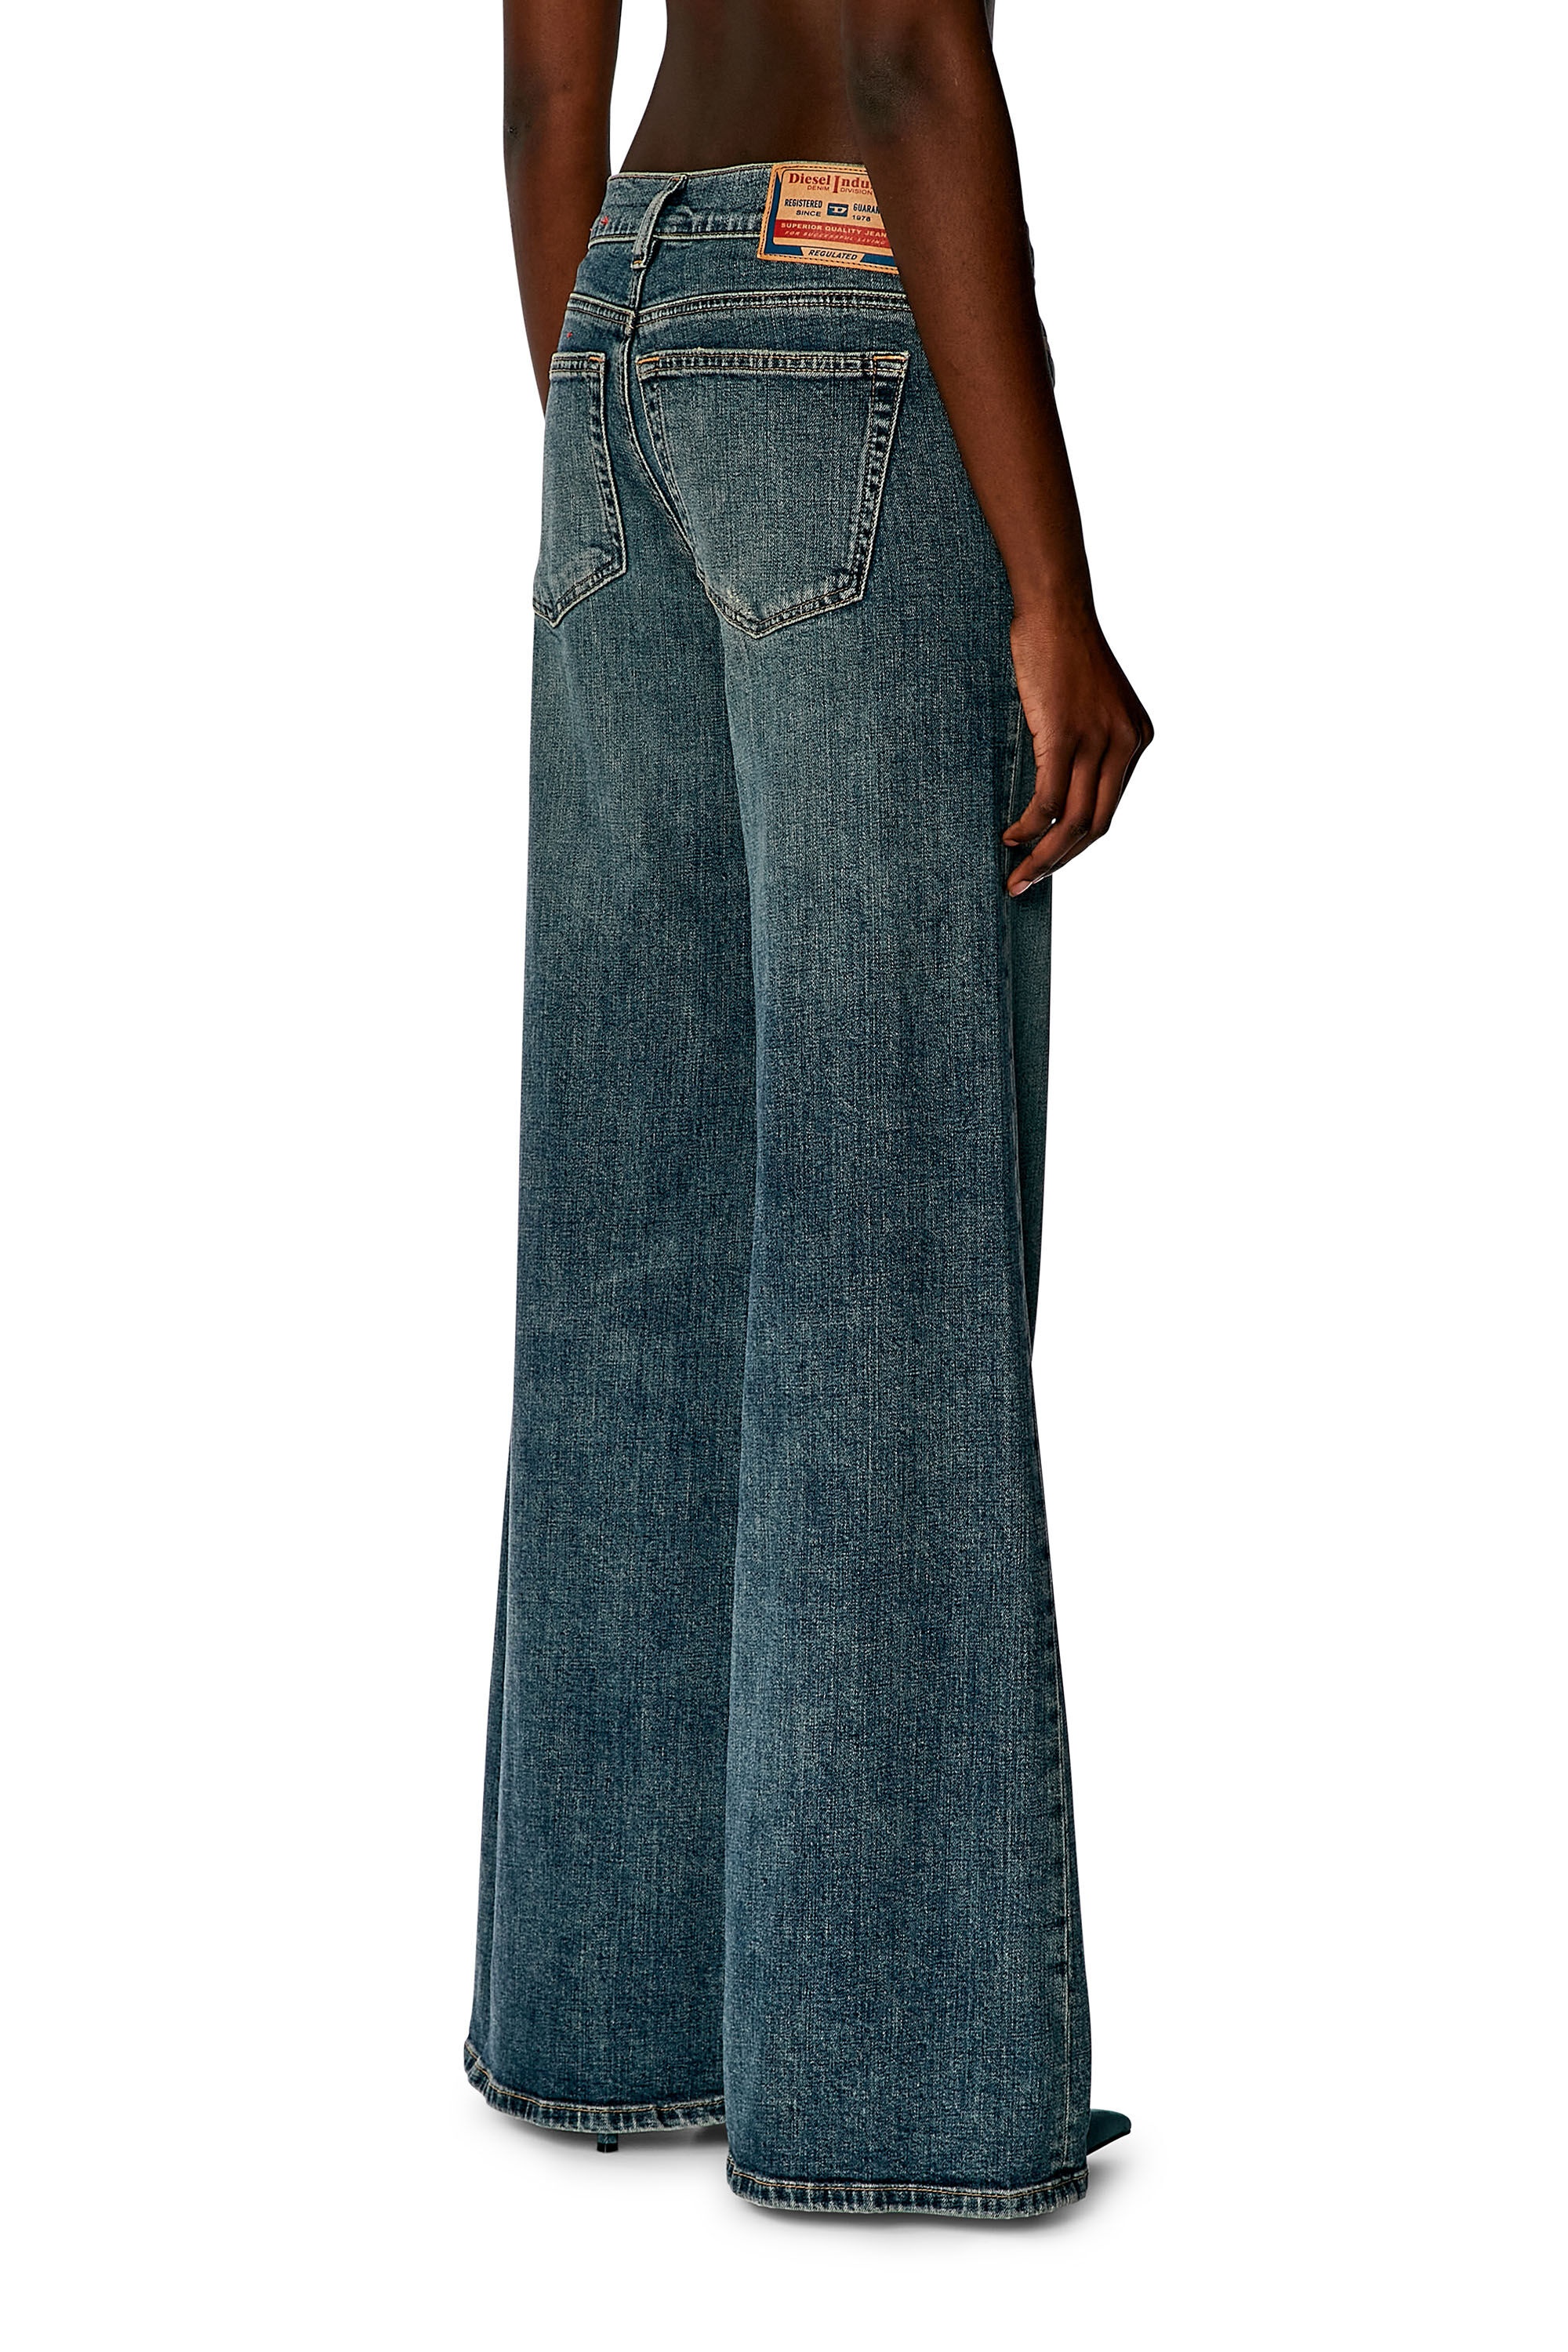 BOOTCUT AND FLARE JEANS 1978 D-AKEMI 0DQAC - 5